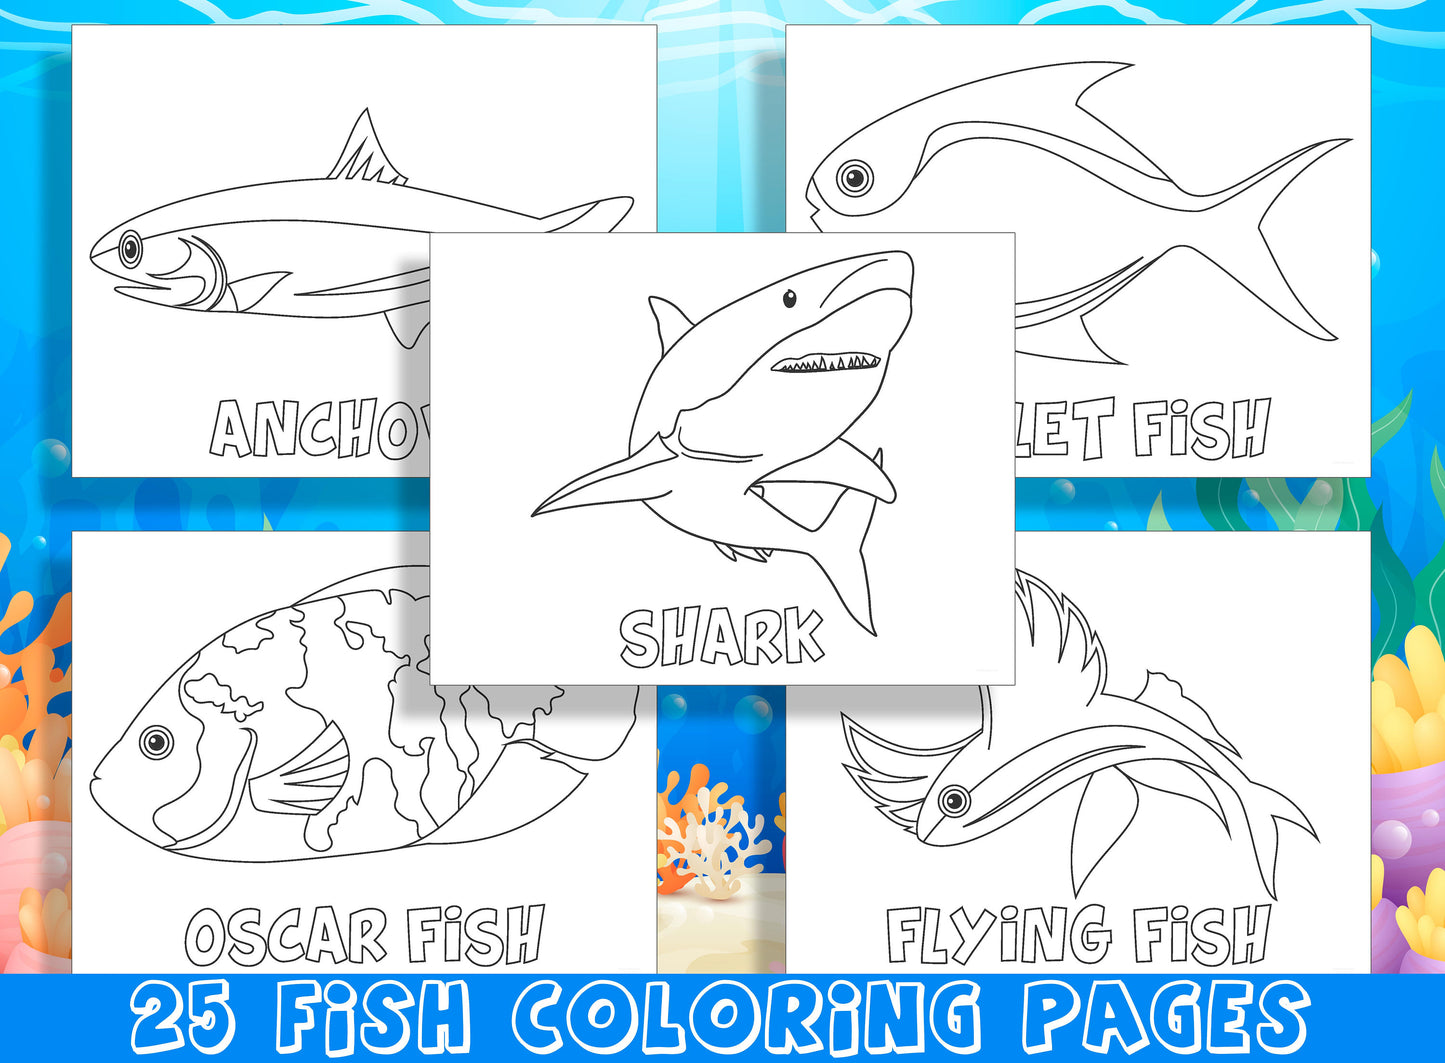 Fish Coloring Pages, 25 Colorful Pages of Underwater Friends to Color and Name, PDF File, Instant Download